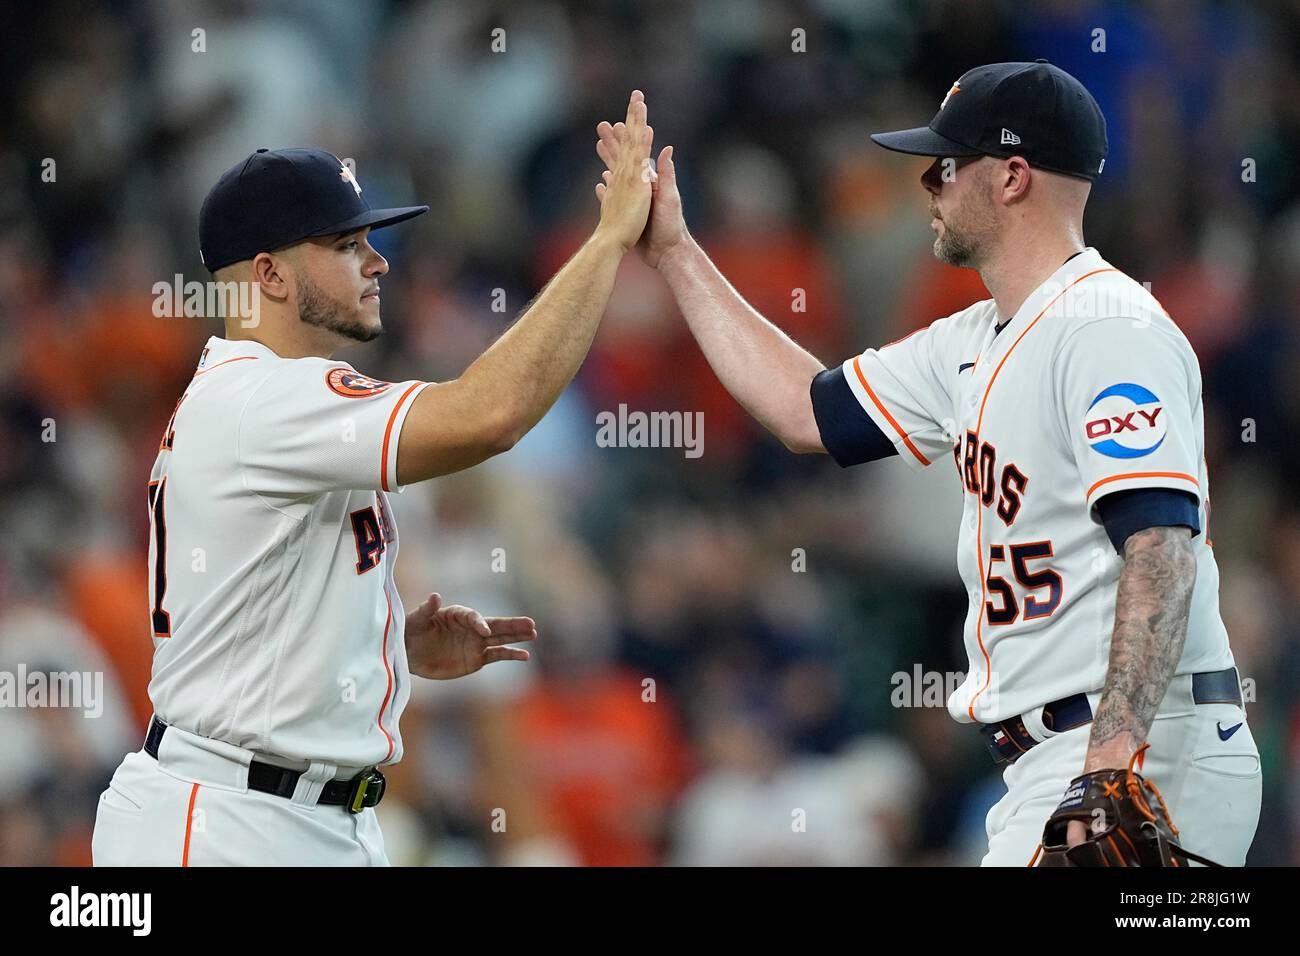 Houston Astros' Ryan Pressly (55) and Yainer Diaz celebrate after